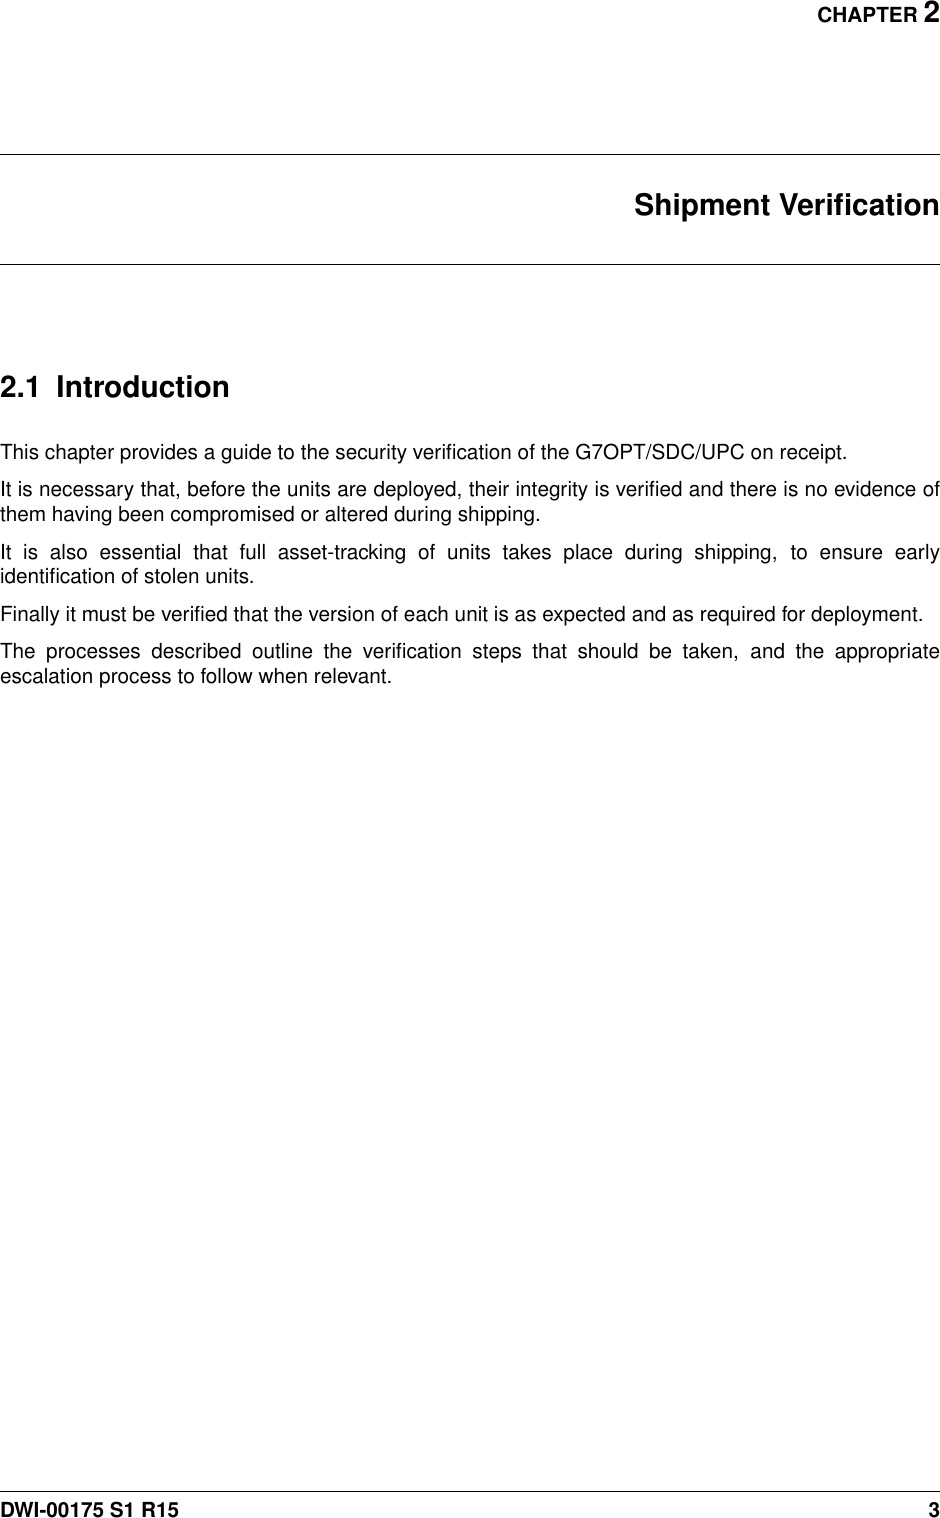 CHAPTER 2Shipment Veriﬁcation2.1 IntroductionThis chapter provides a guide to the security veriﬁcation of the G7OPT/SDC/UPC on receipt.It is necessary that, before the units are deployed, their integrity is veriﬁed and there is no evidence ofthem having been compromised or altered during shipping.It is also essential that full asset-tracking of units takes place during shipping, to ensure earlyidentiﬁcation of stolen units.Finally it must be veriﬁed that the version of each unit is as expected and as required for deployment.The processes described outline the veriﬁcation steps that should be taken, and the appropriateescalation process to follow when relevant.DWI-00175 S1 R15 3